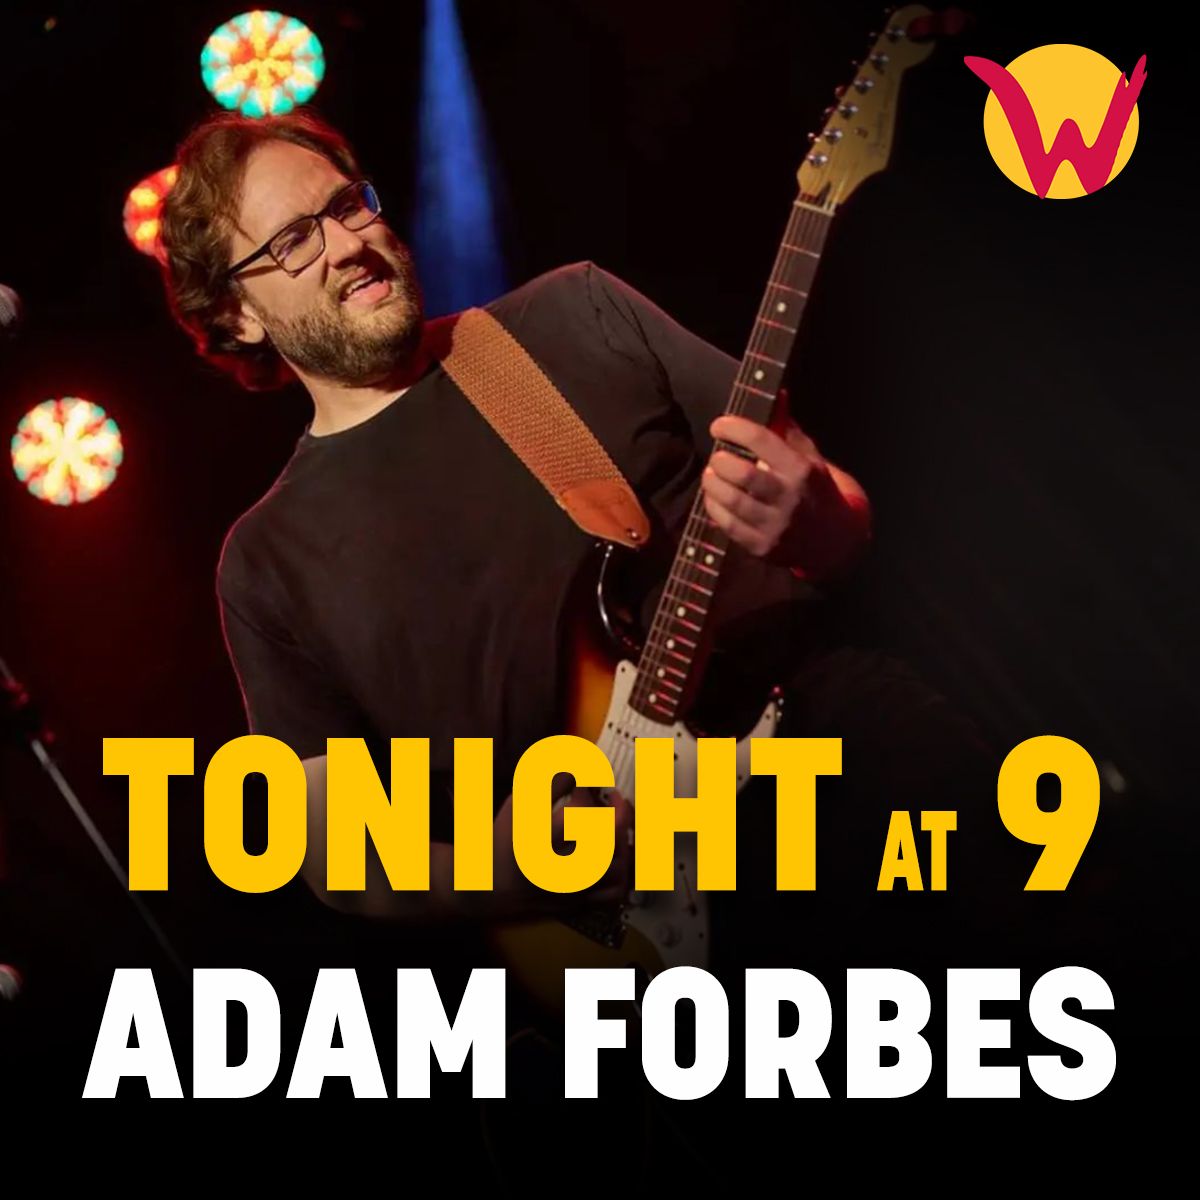 🎸 Tonight at 9 PM, join us at Wingos for an unforgettable performance by the talented Adam Forbes! 🎶 Enjoy great music, delicious wings, and a fantastic atmosphere. As we always say, come for the wings and stay for the music! See you at 2218 Wisconsin Ave NW 🎤